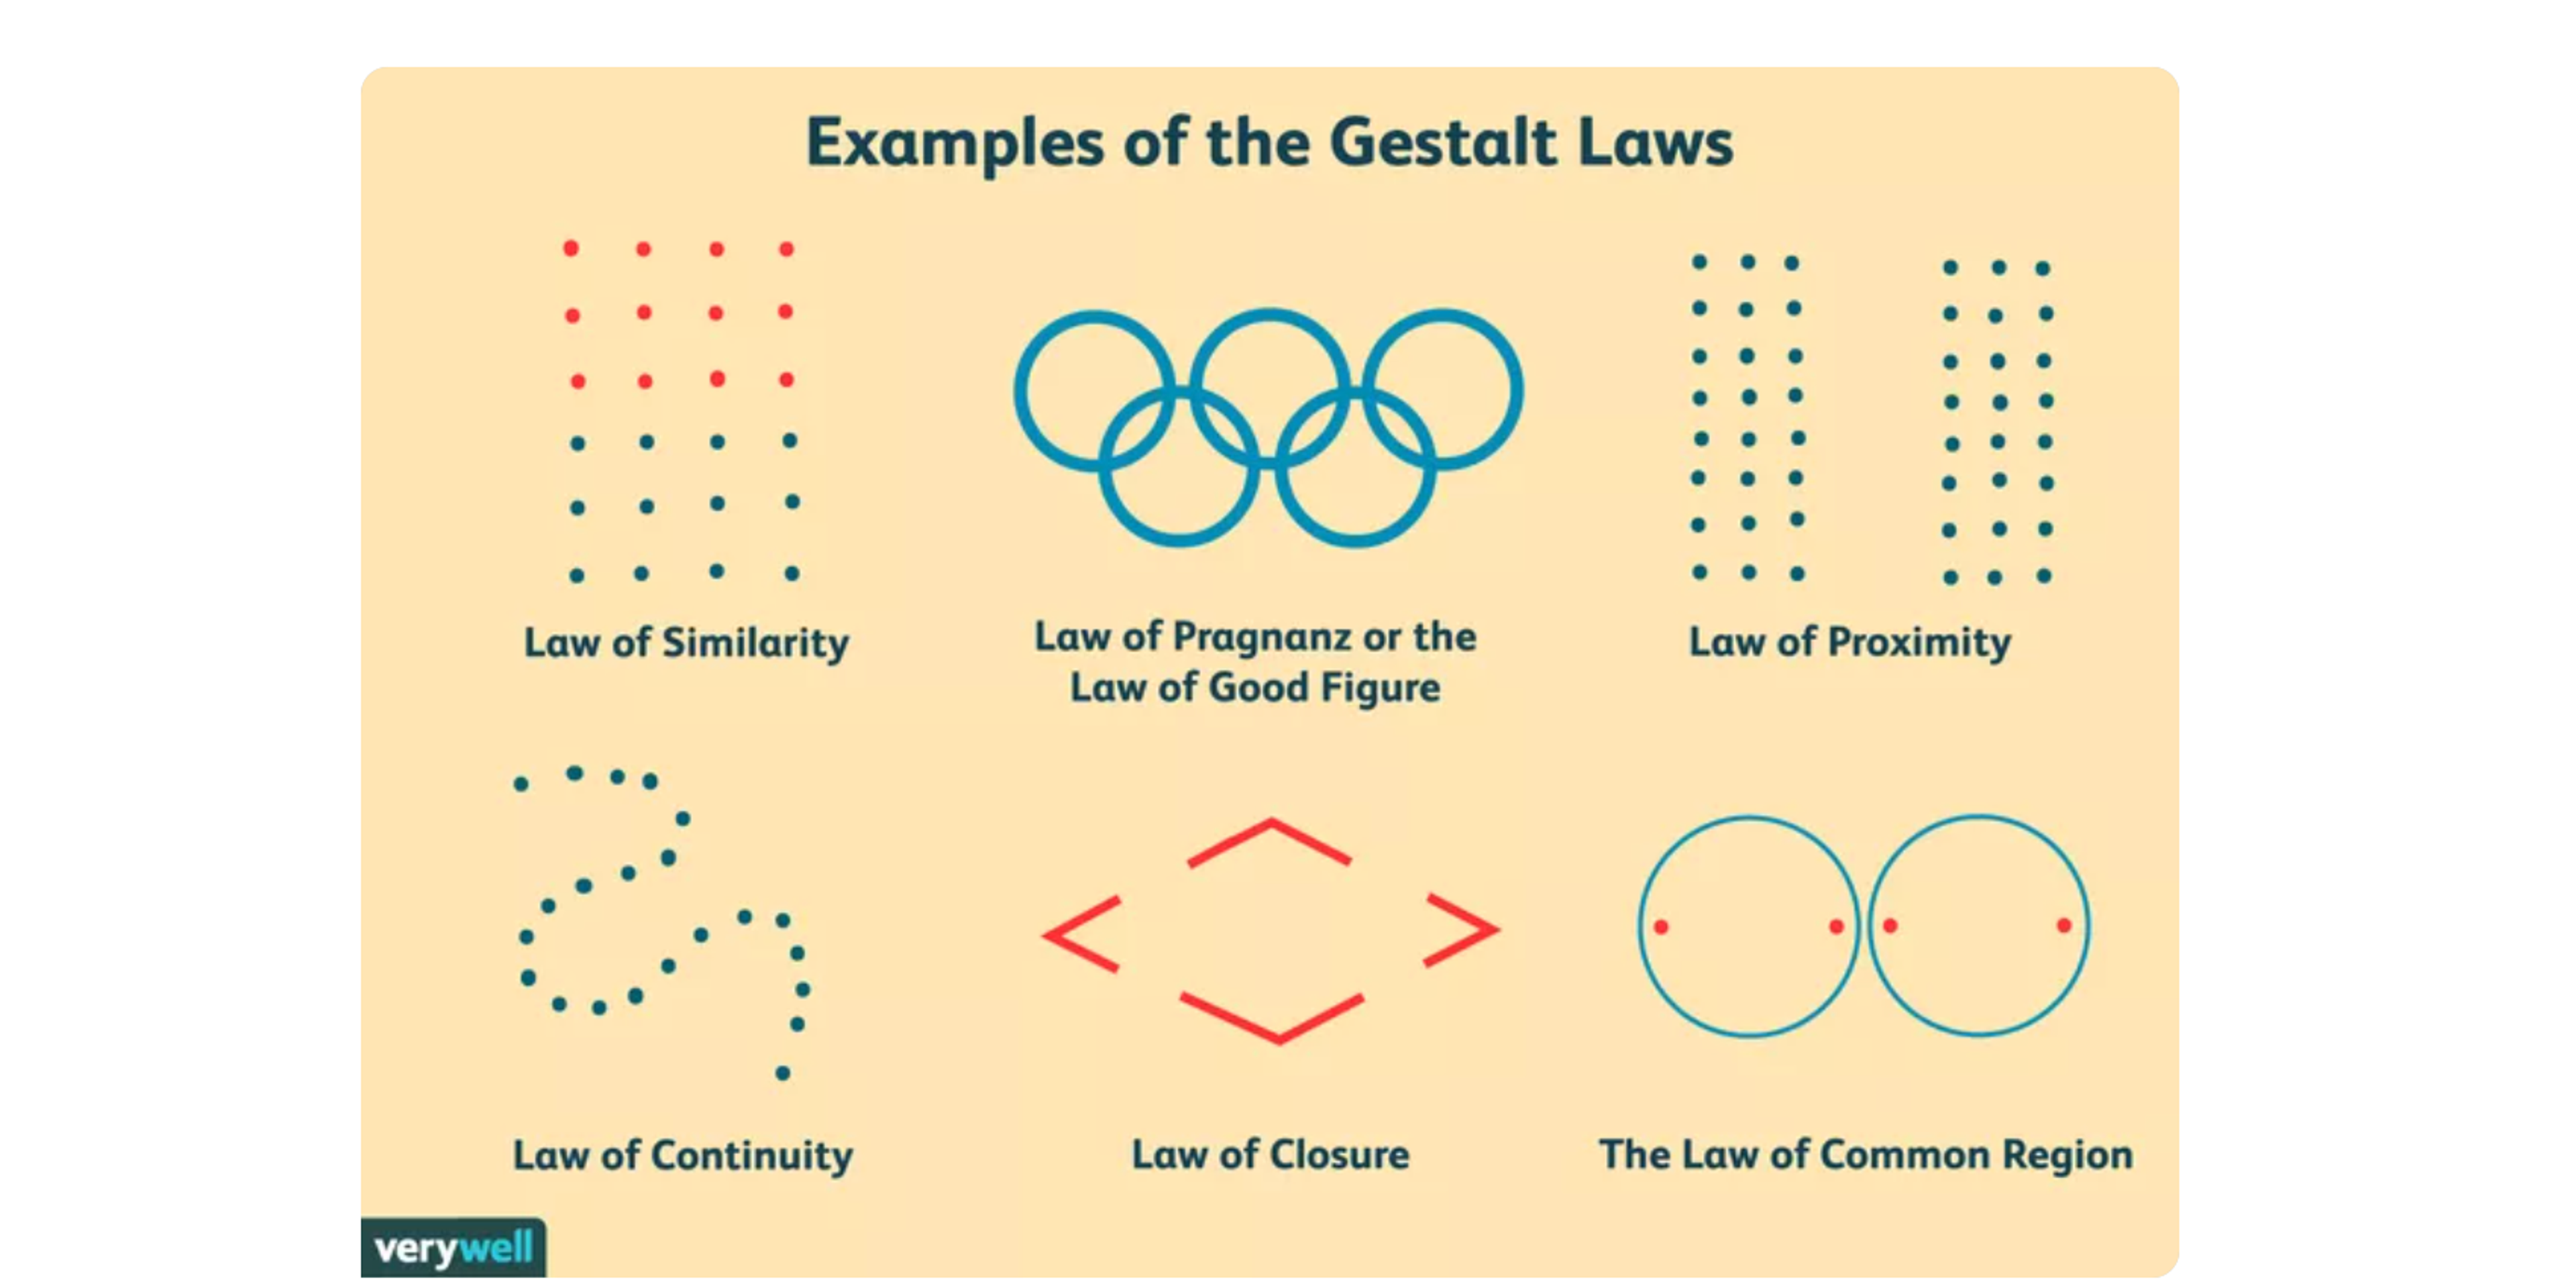 a poster showing examples of the gestallt laws